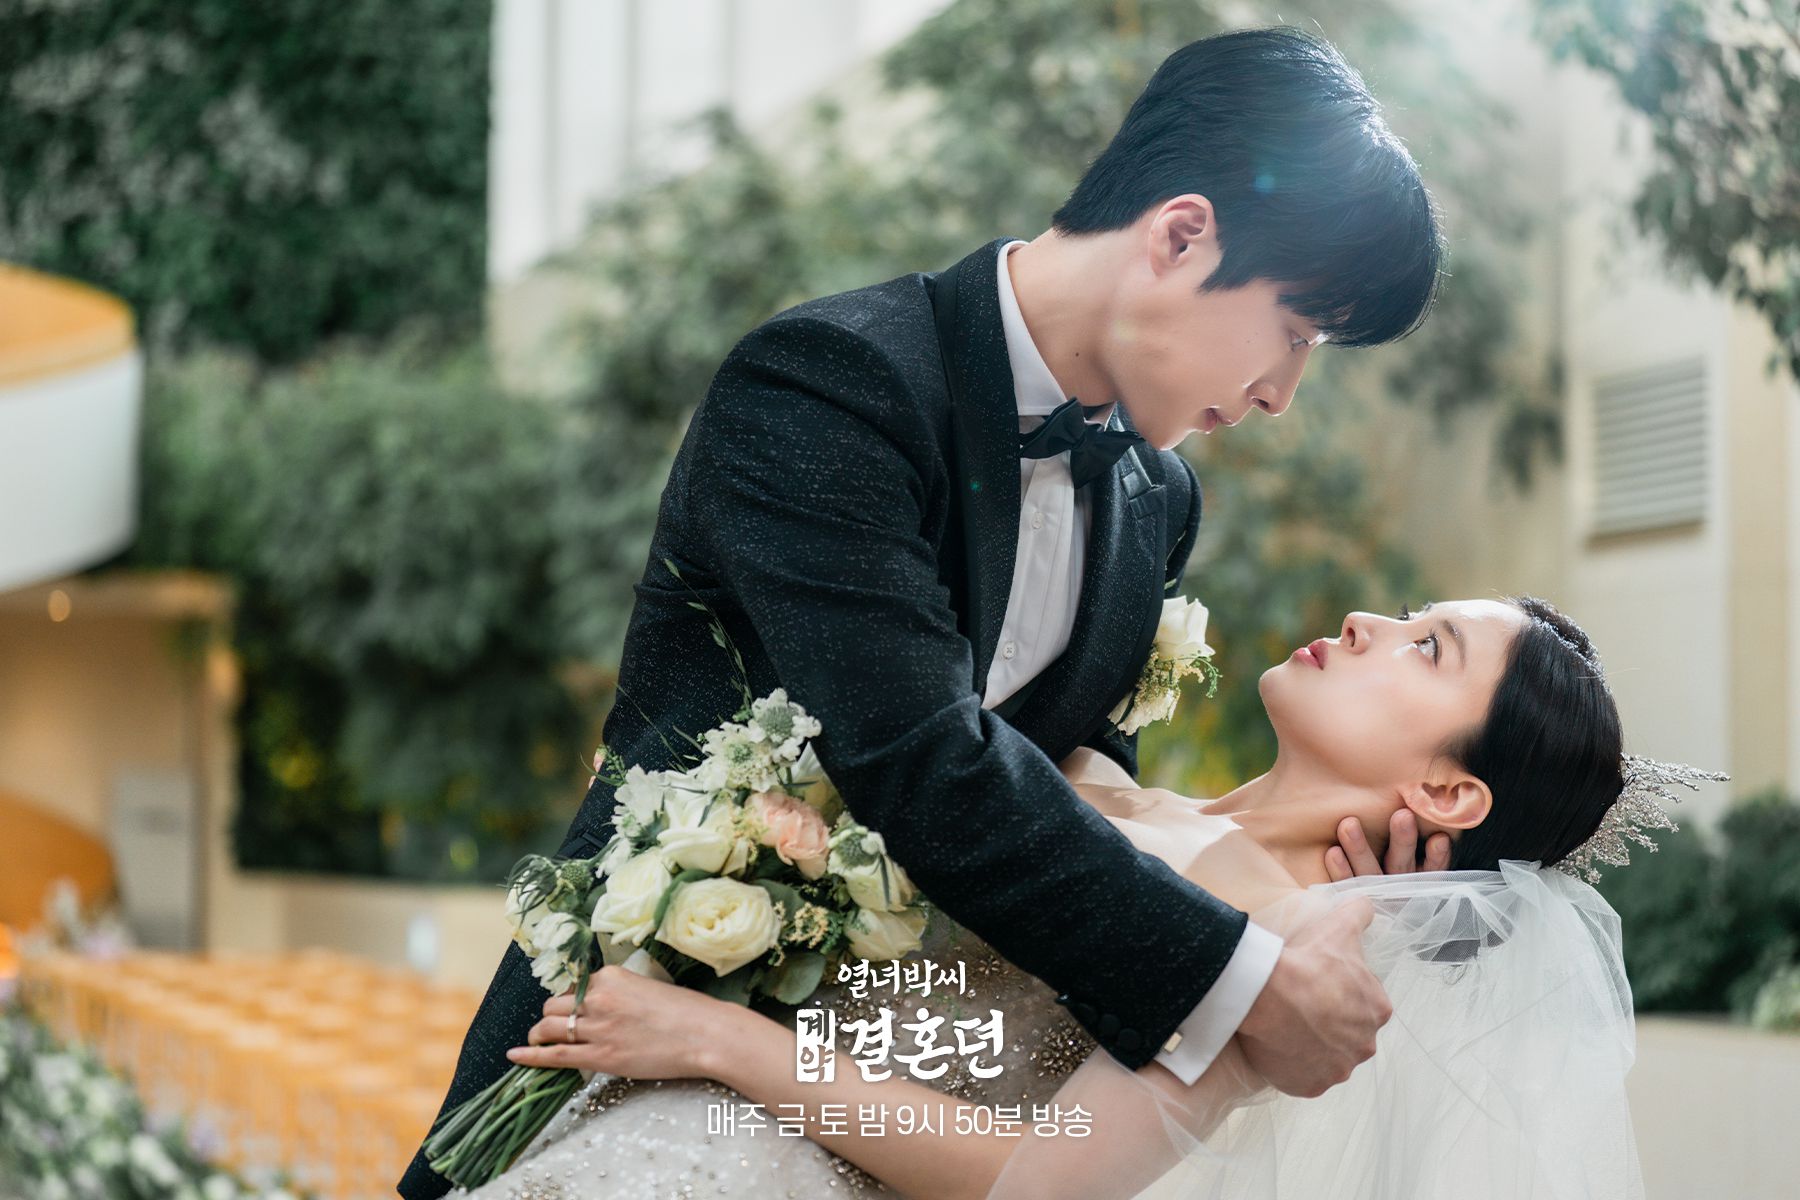 Sinopsis The Story of Park's Marriage Contract